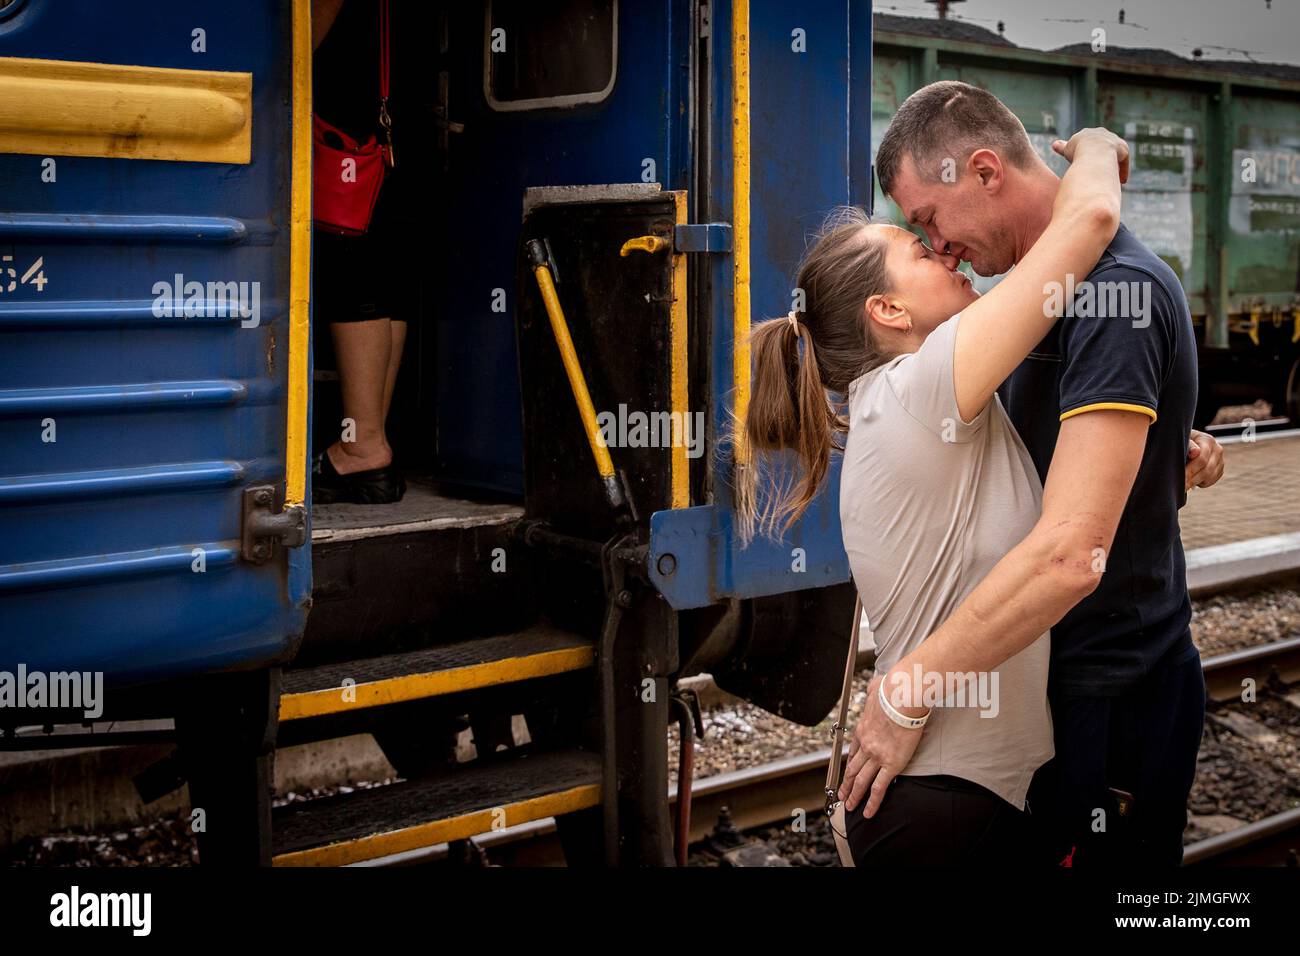 A boyfriend kisses and bids farewell to his girlfriend before she departs to Dnipro by the evacuation train at Pokorvsk Train Station, Donetsk. Amid the intensified fighting in the Eastern part of Ukraine, east Ukraine is now intensifying its civilian evacuation, as millions of Ukrainian families have been evacuating from the closer and closer war, as many of them will be relocated to the western part of the country. According to the United Nations, at least 12 million people have fled their homes since Russia's invasion of Ukraine, while seven million people are displaced inside the country. Stock Photo